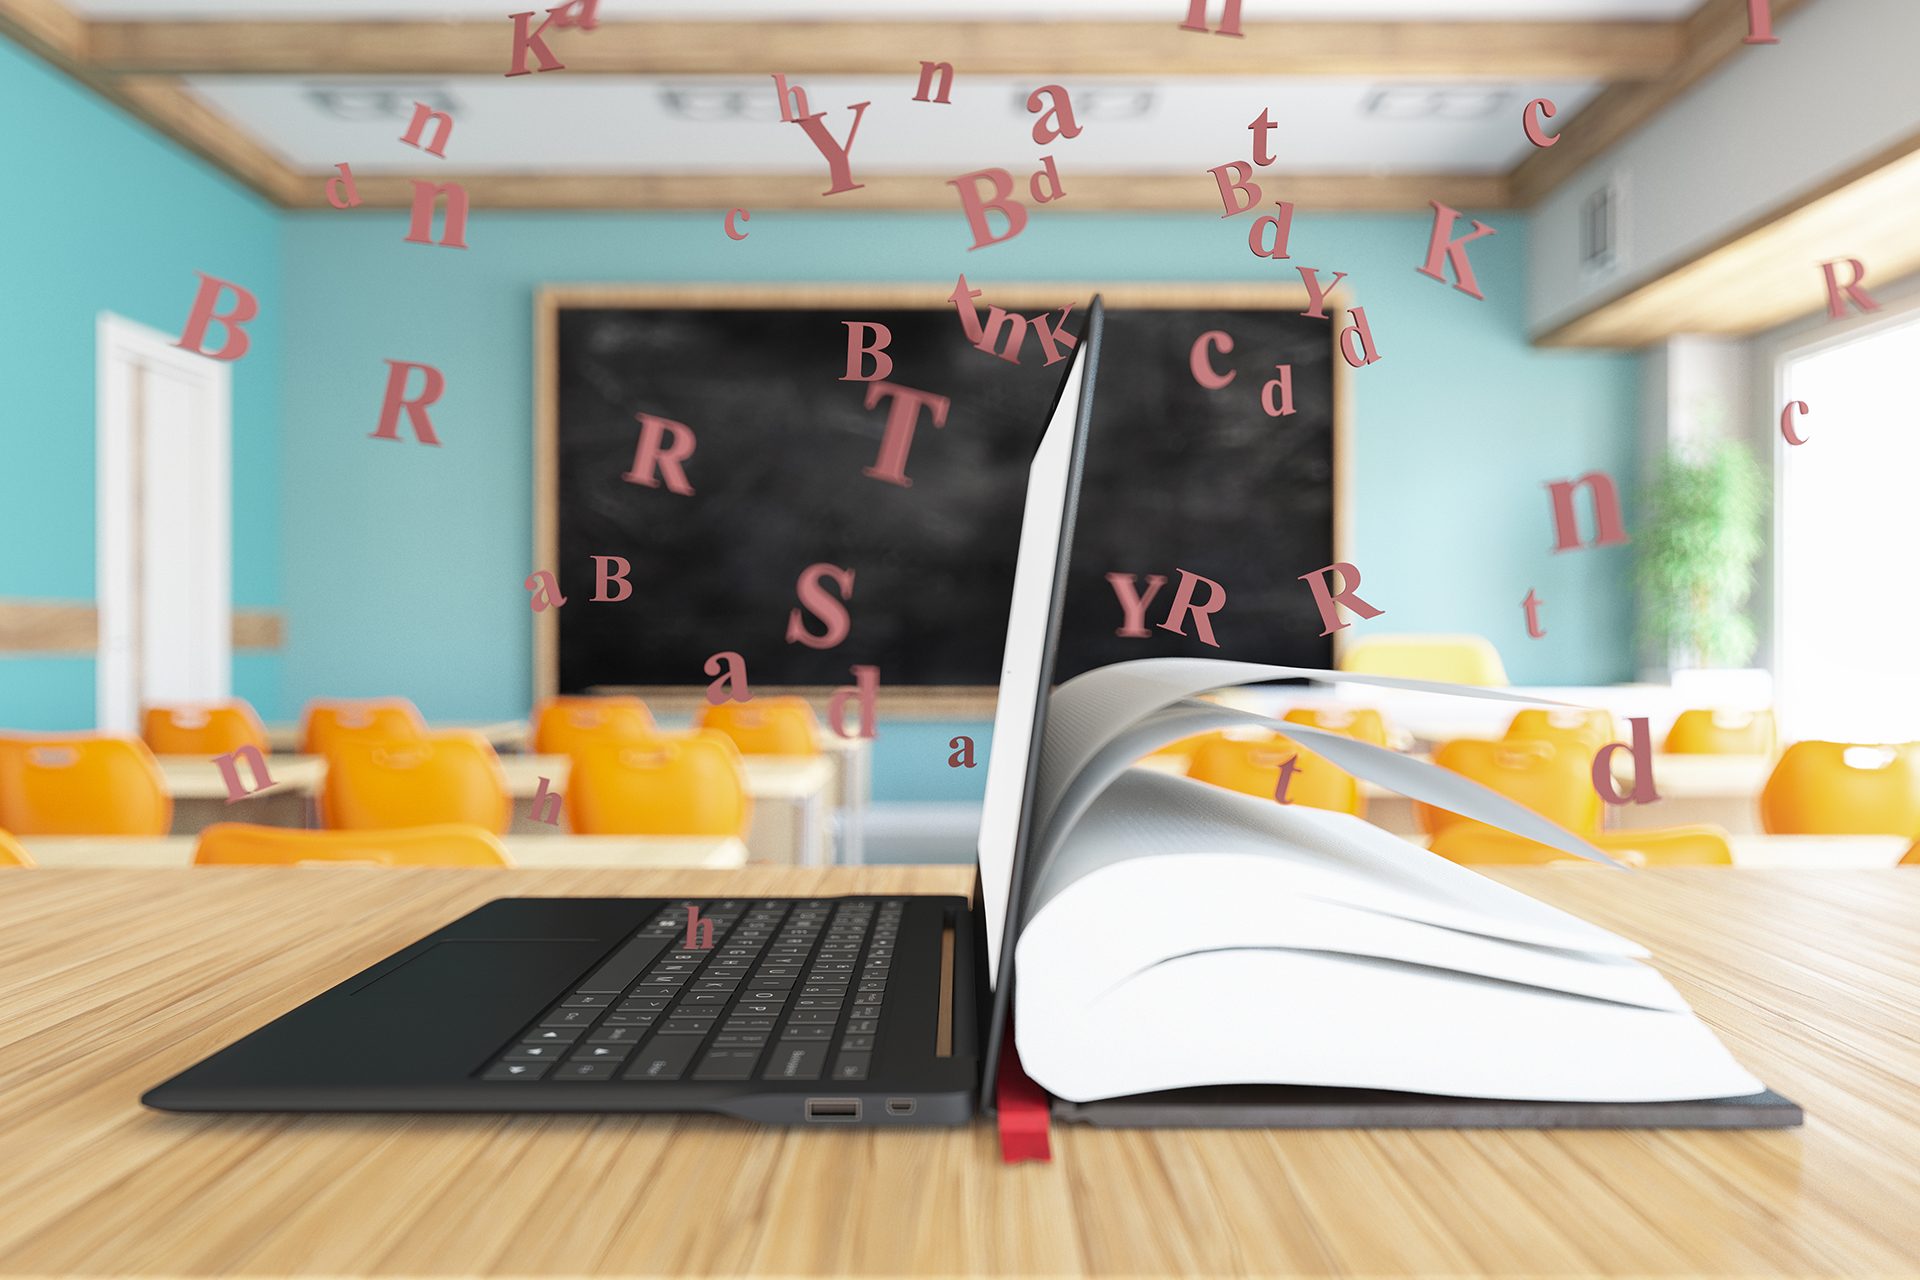 Computer on left and book on right showing the merging of educational resources